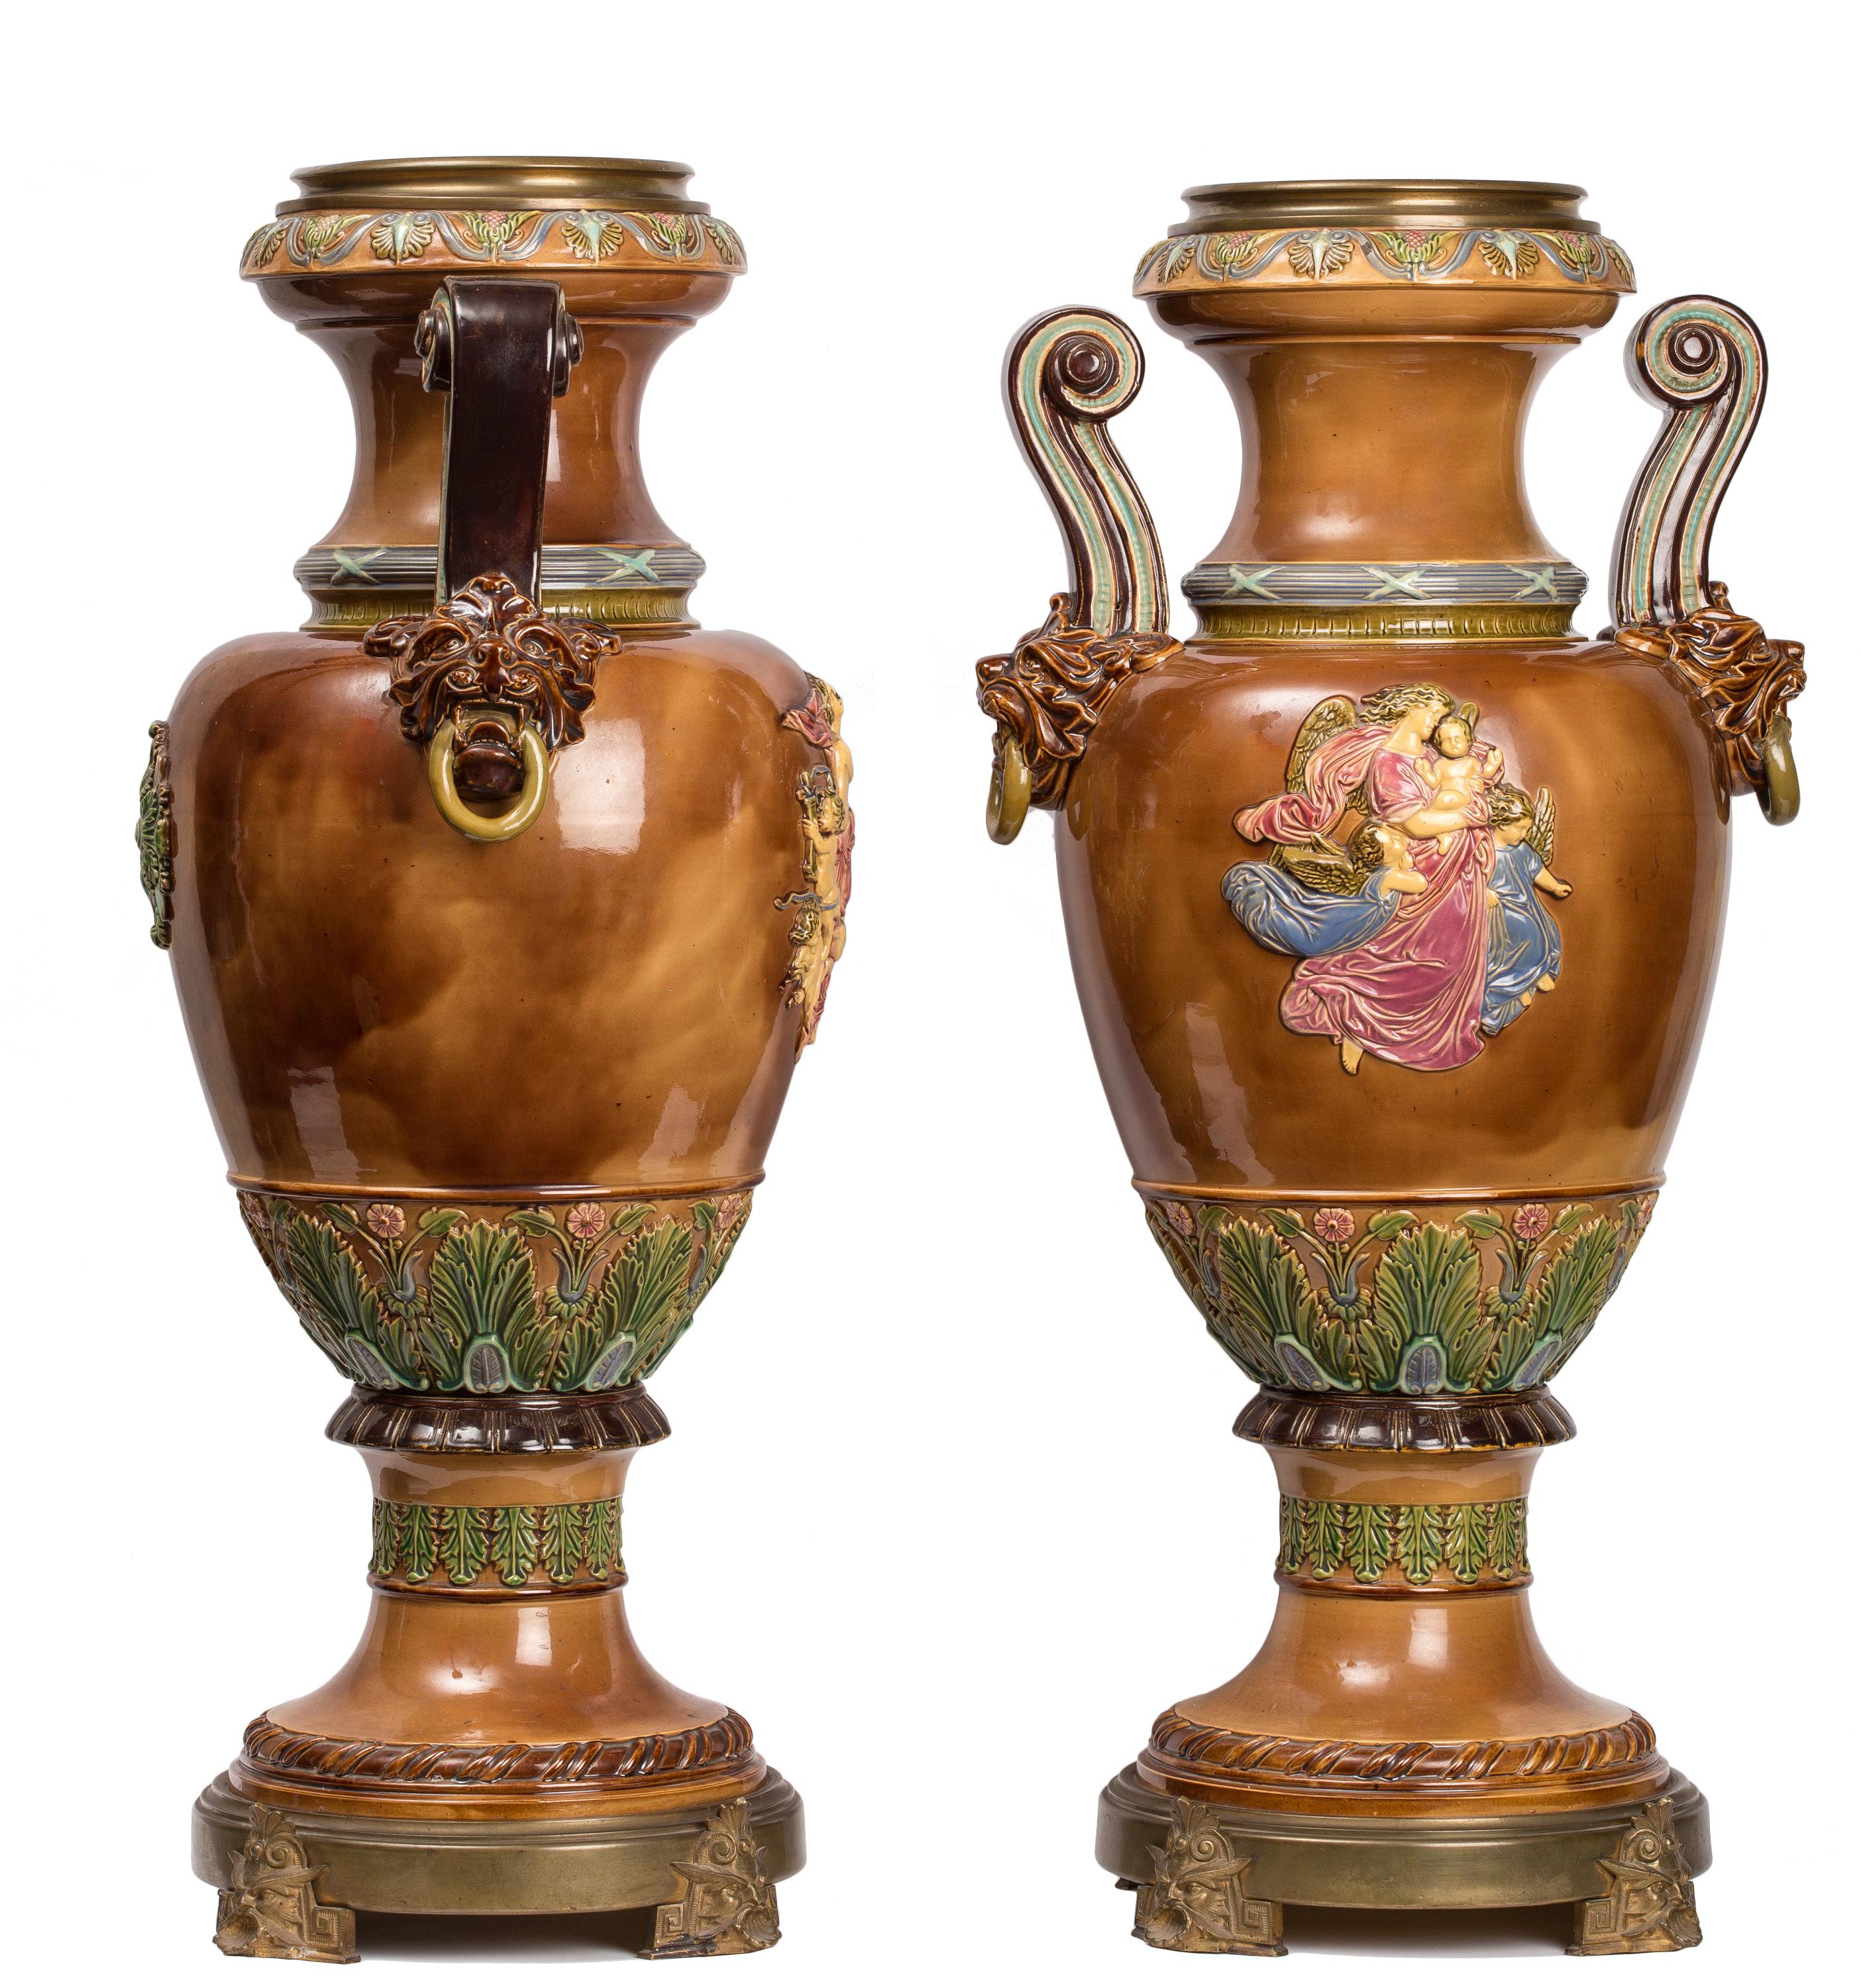 A matched pair of late 19th century Bohemian / German majolica porcelain urns. With a contrasting mix of Christian, mythological, grotesque and neoclassical elements, they exemplify the highly decorative, 